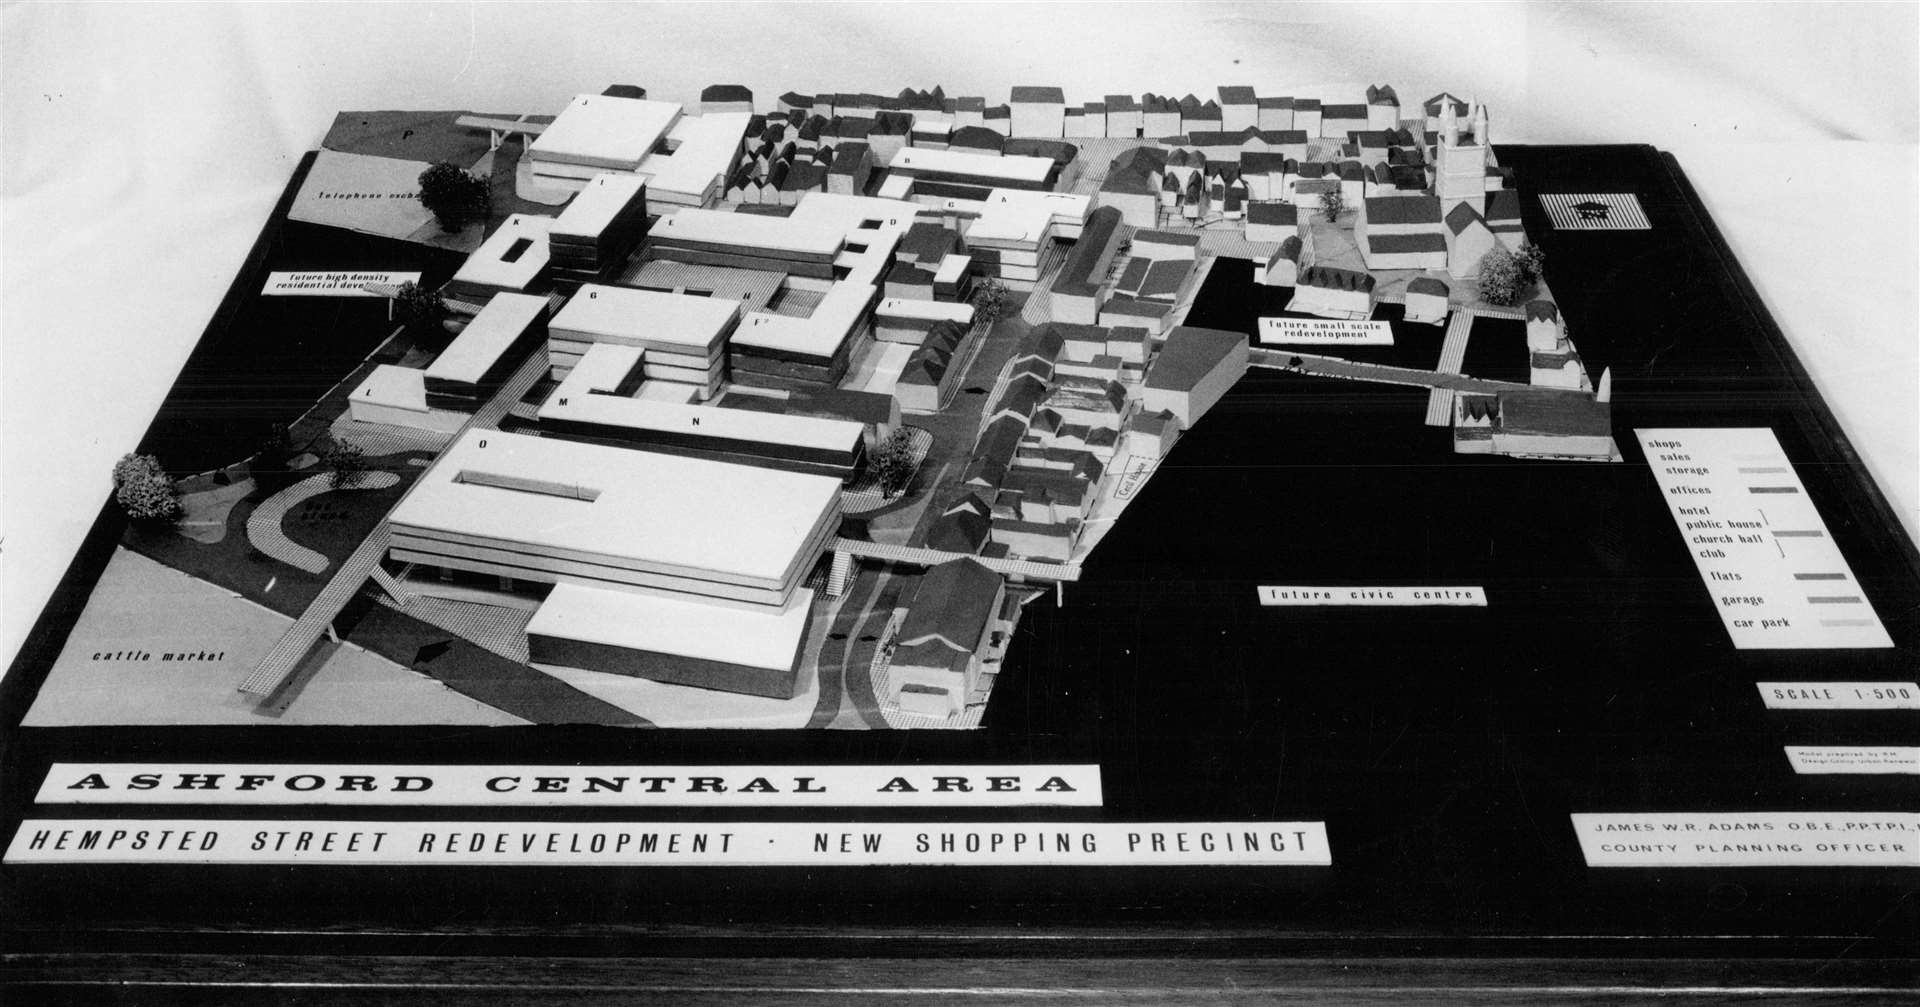 The original model in 1963 showing the proposed shopping centre development. At this stage, the scheme was called the Hempsted Street shopping centre. Picture: Steve Salter